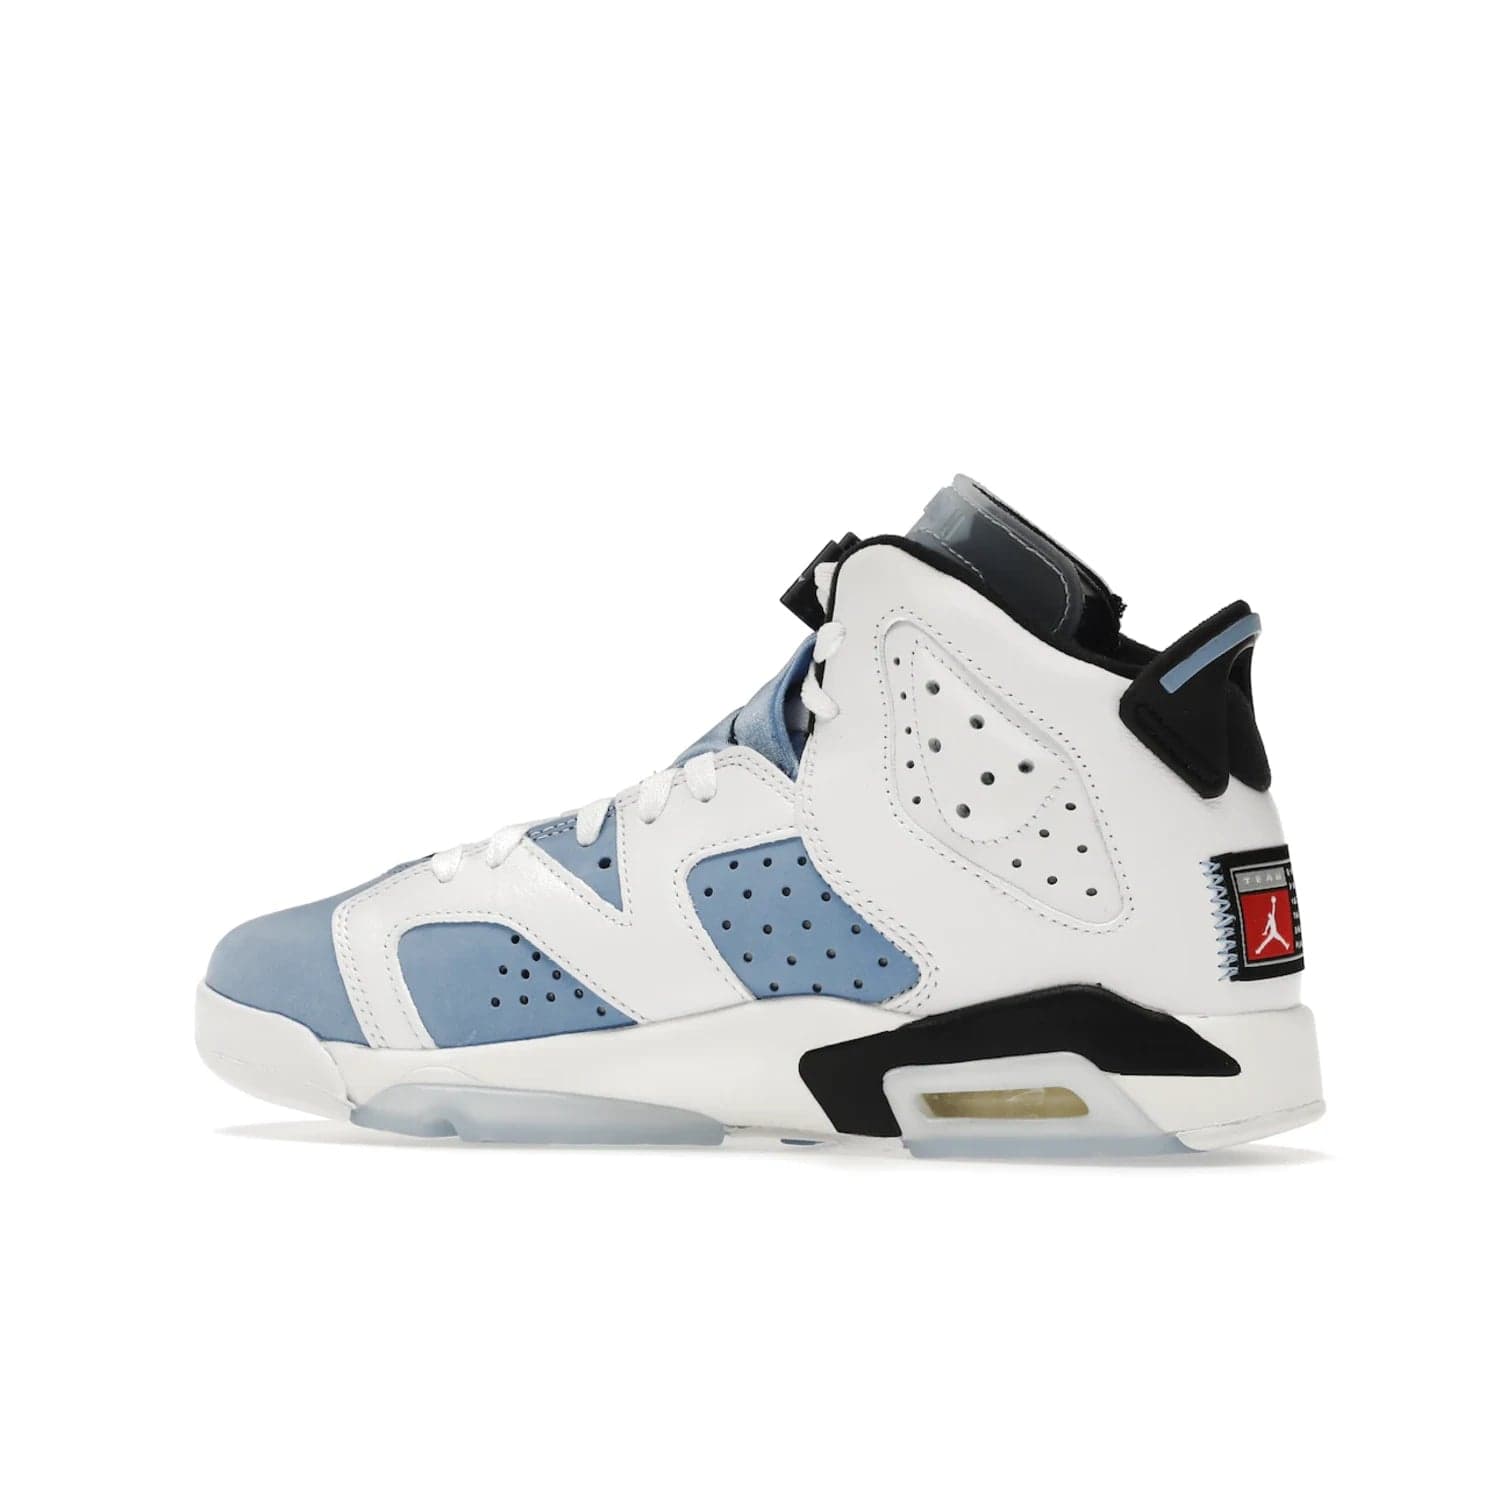 Jordan 6 Retro UNC White (GS) - Image 21 - Only at www.BallersClubKickz.com - Air Jordan 6 Retro UNC White GS: Michael Jordan alma mater, UNC Tar Heels, featuring colorway, nubuck, leather, Jumpman branding and a visible Air unit. Translucent blue/white outsole, perfect for completing sneaker rotation.